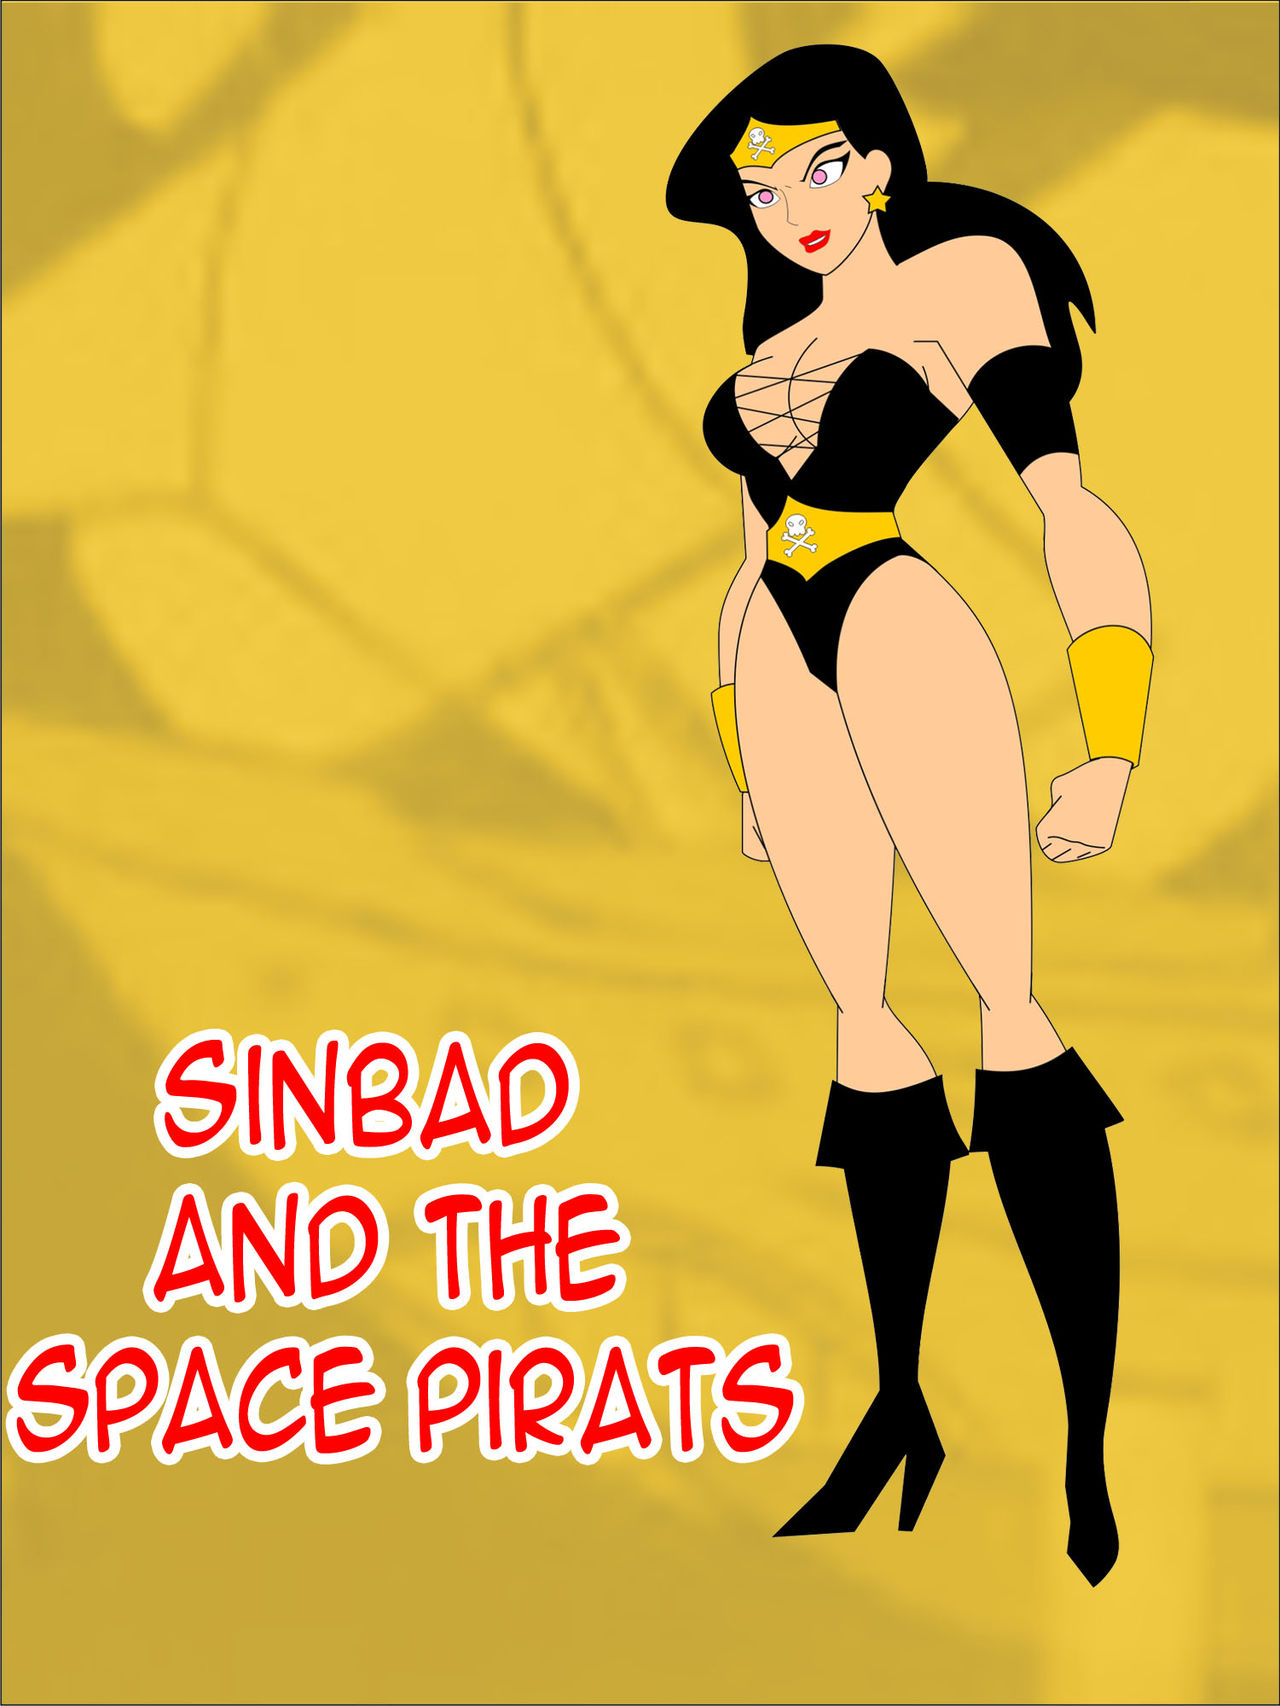 [Jimryu] Sinbad and the Space Pirates (Justice League) [German] {kevink102937517} 